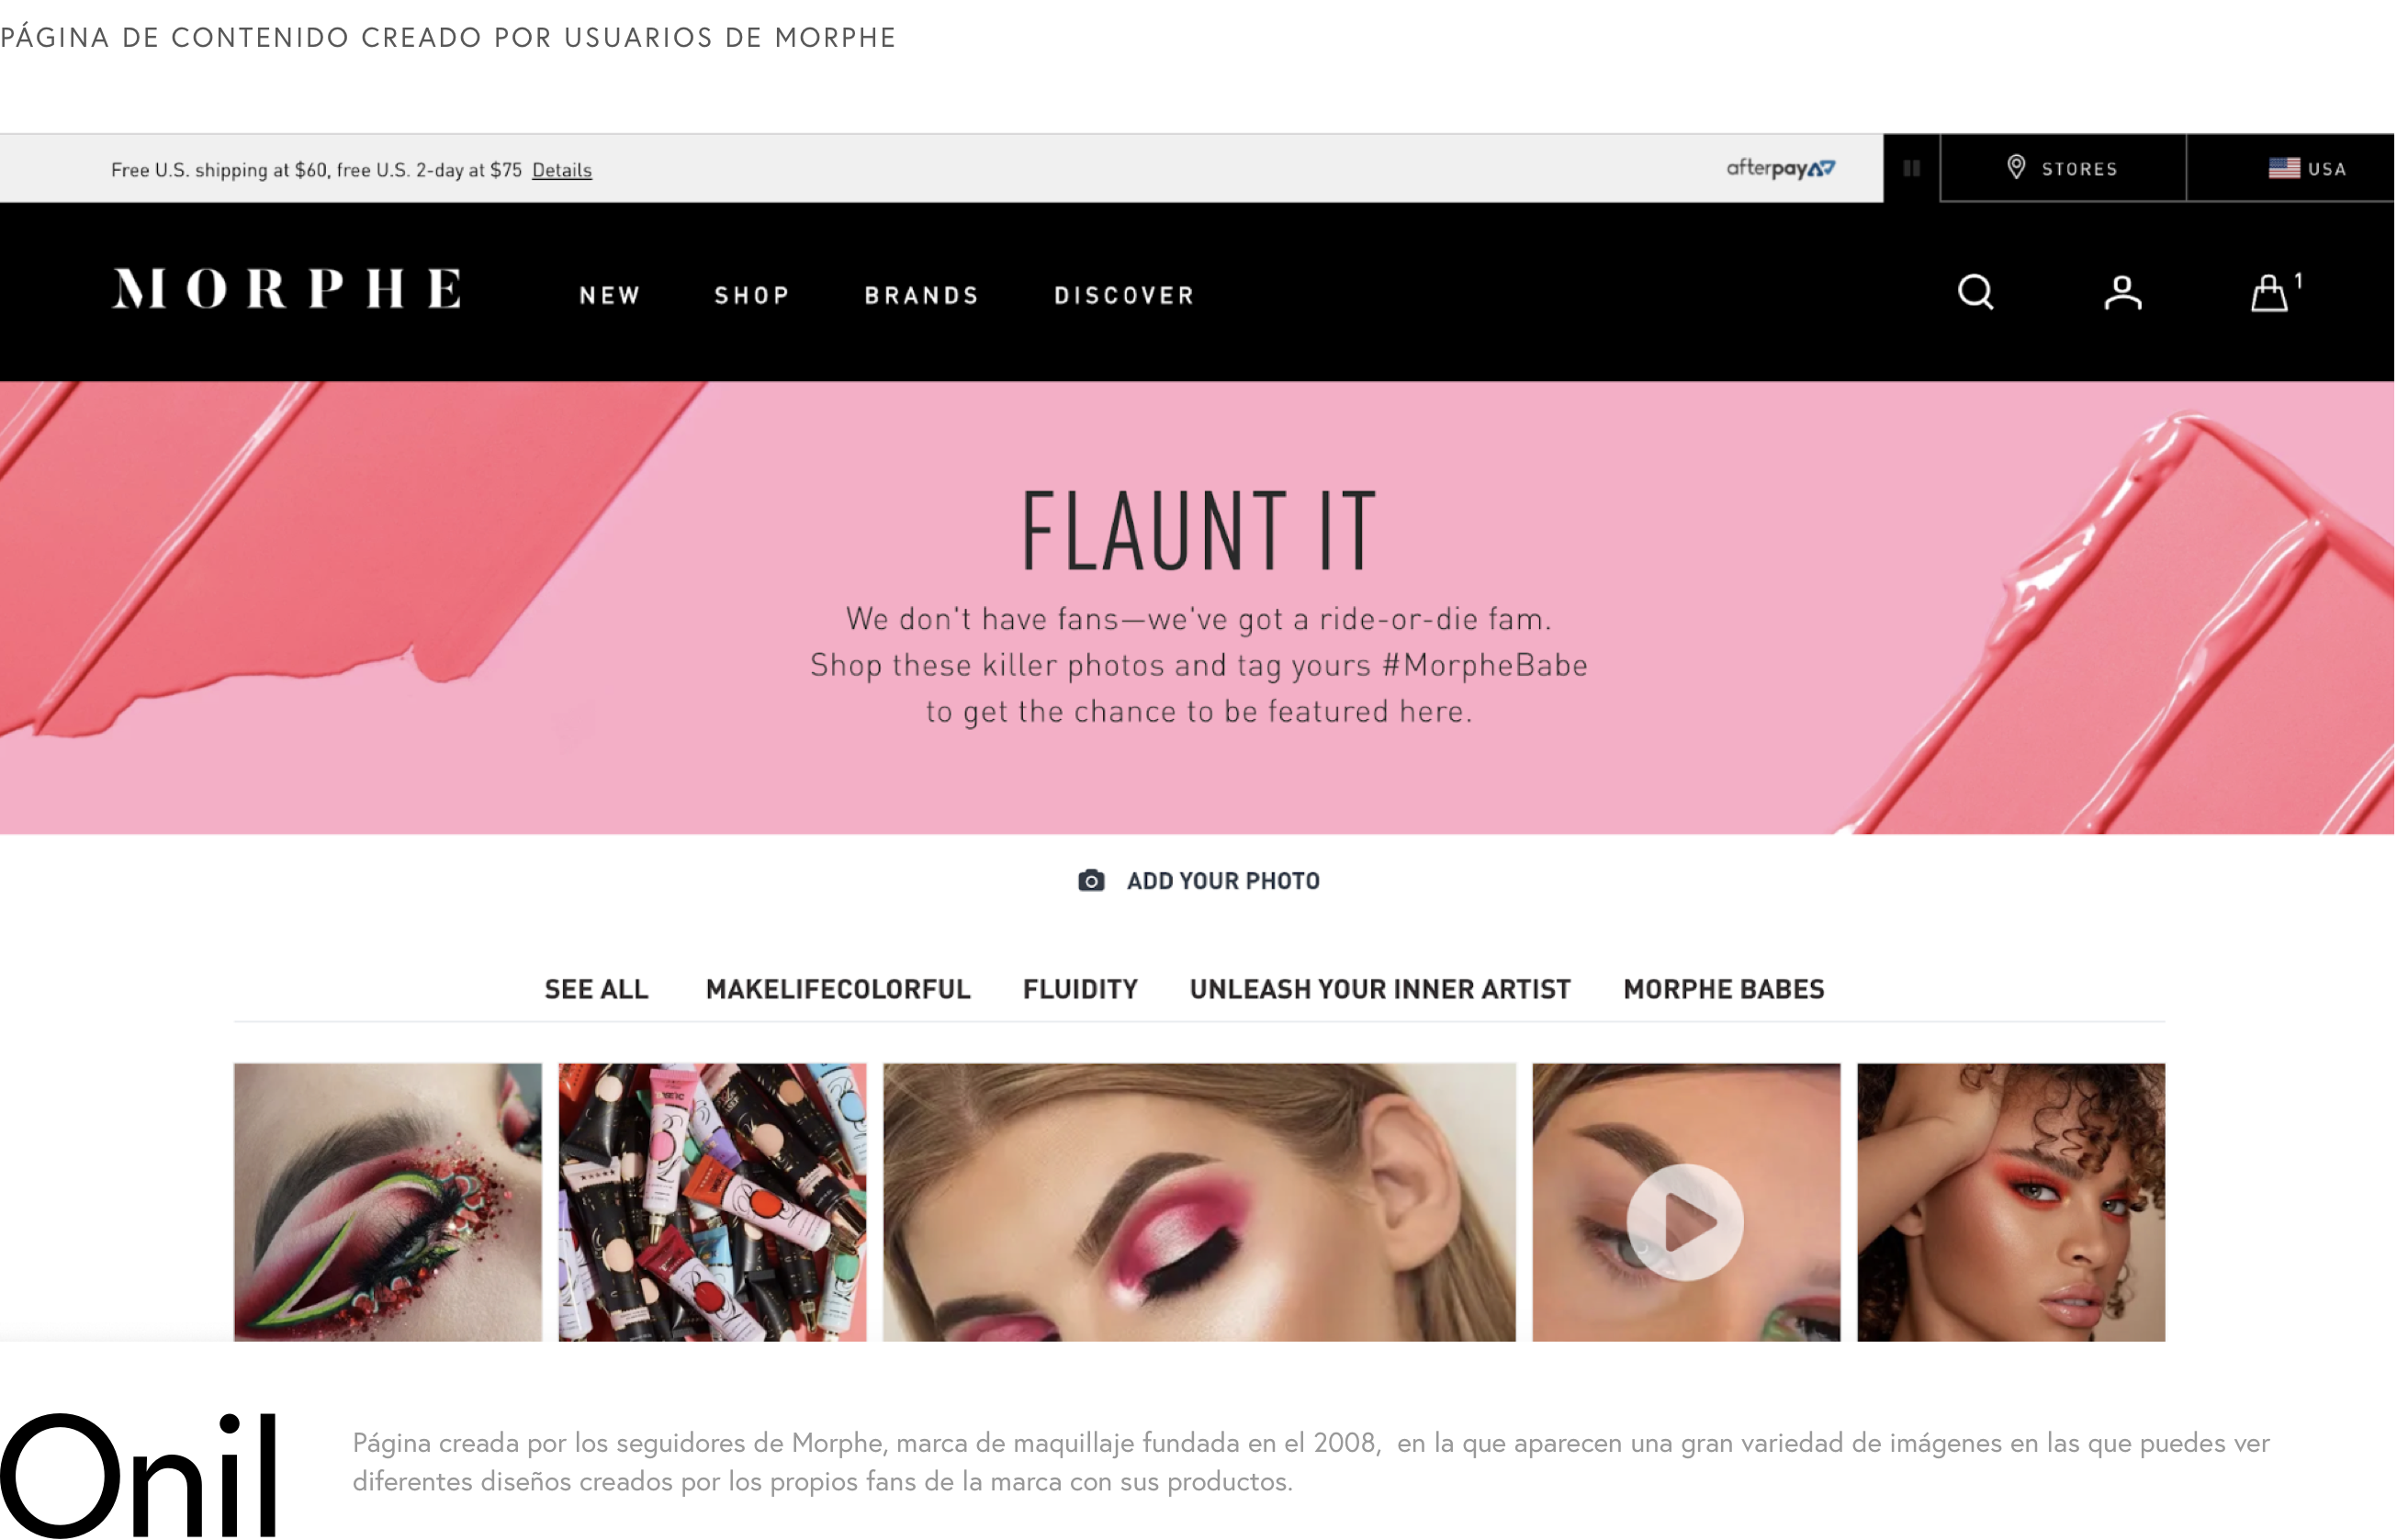 Content page created by Morphe users - Page created by Morphe followers, in which a wide variety of images appear in which you can see different designs created by the brand's own fans with their products.